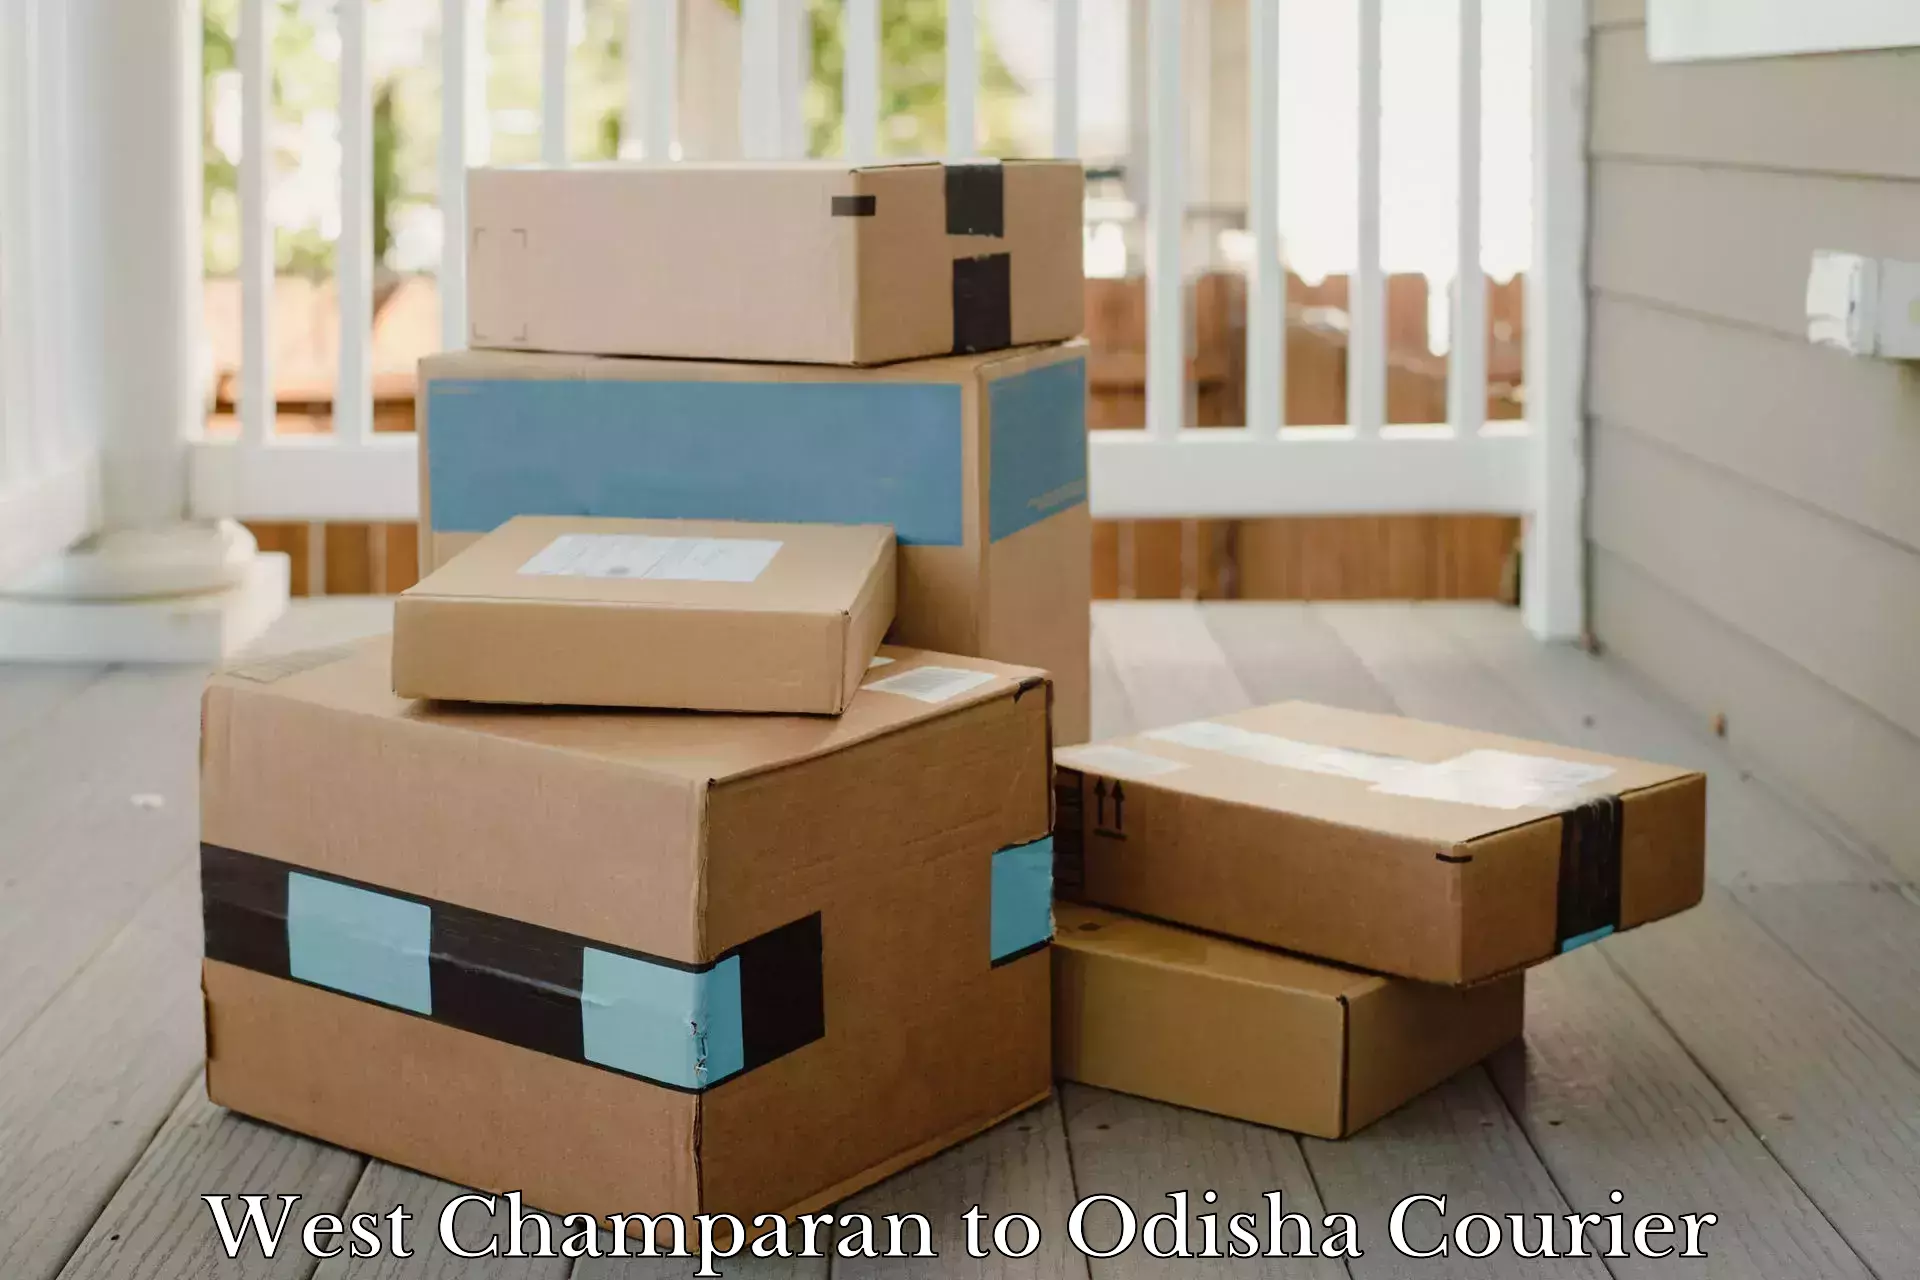 Secure freight services in West Champaran to Dandisahi